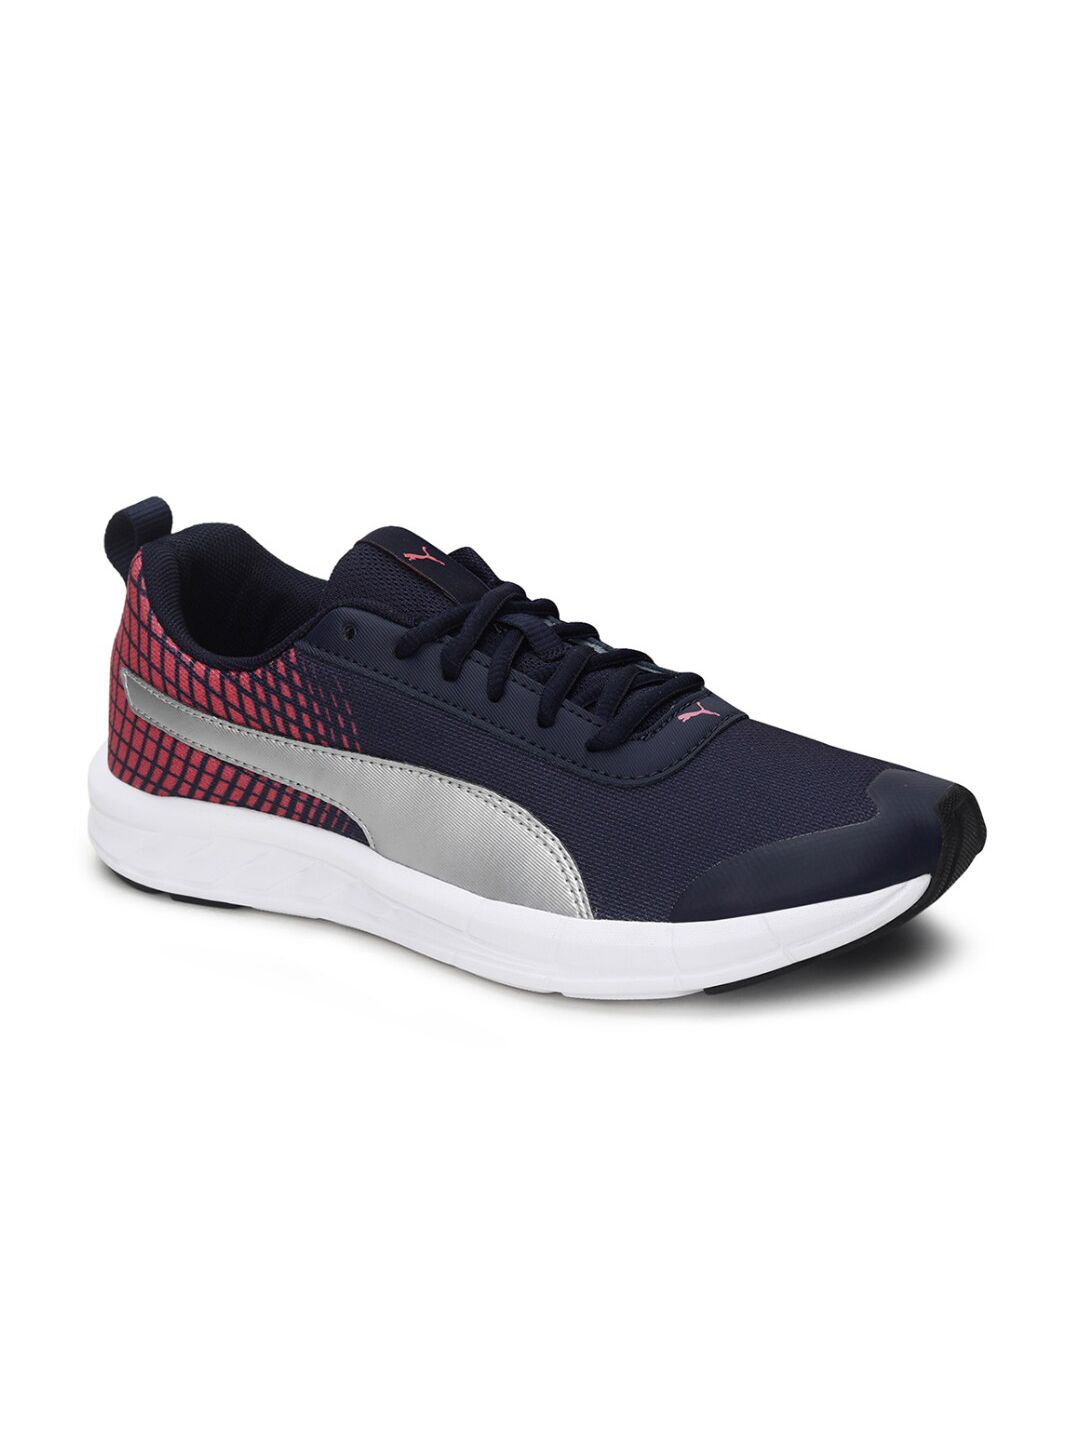 Puma Women Blue Red Supernal NU 2 Running Shoes Price in India